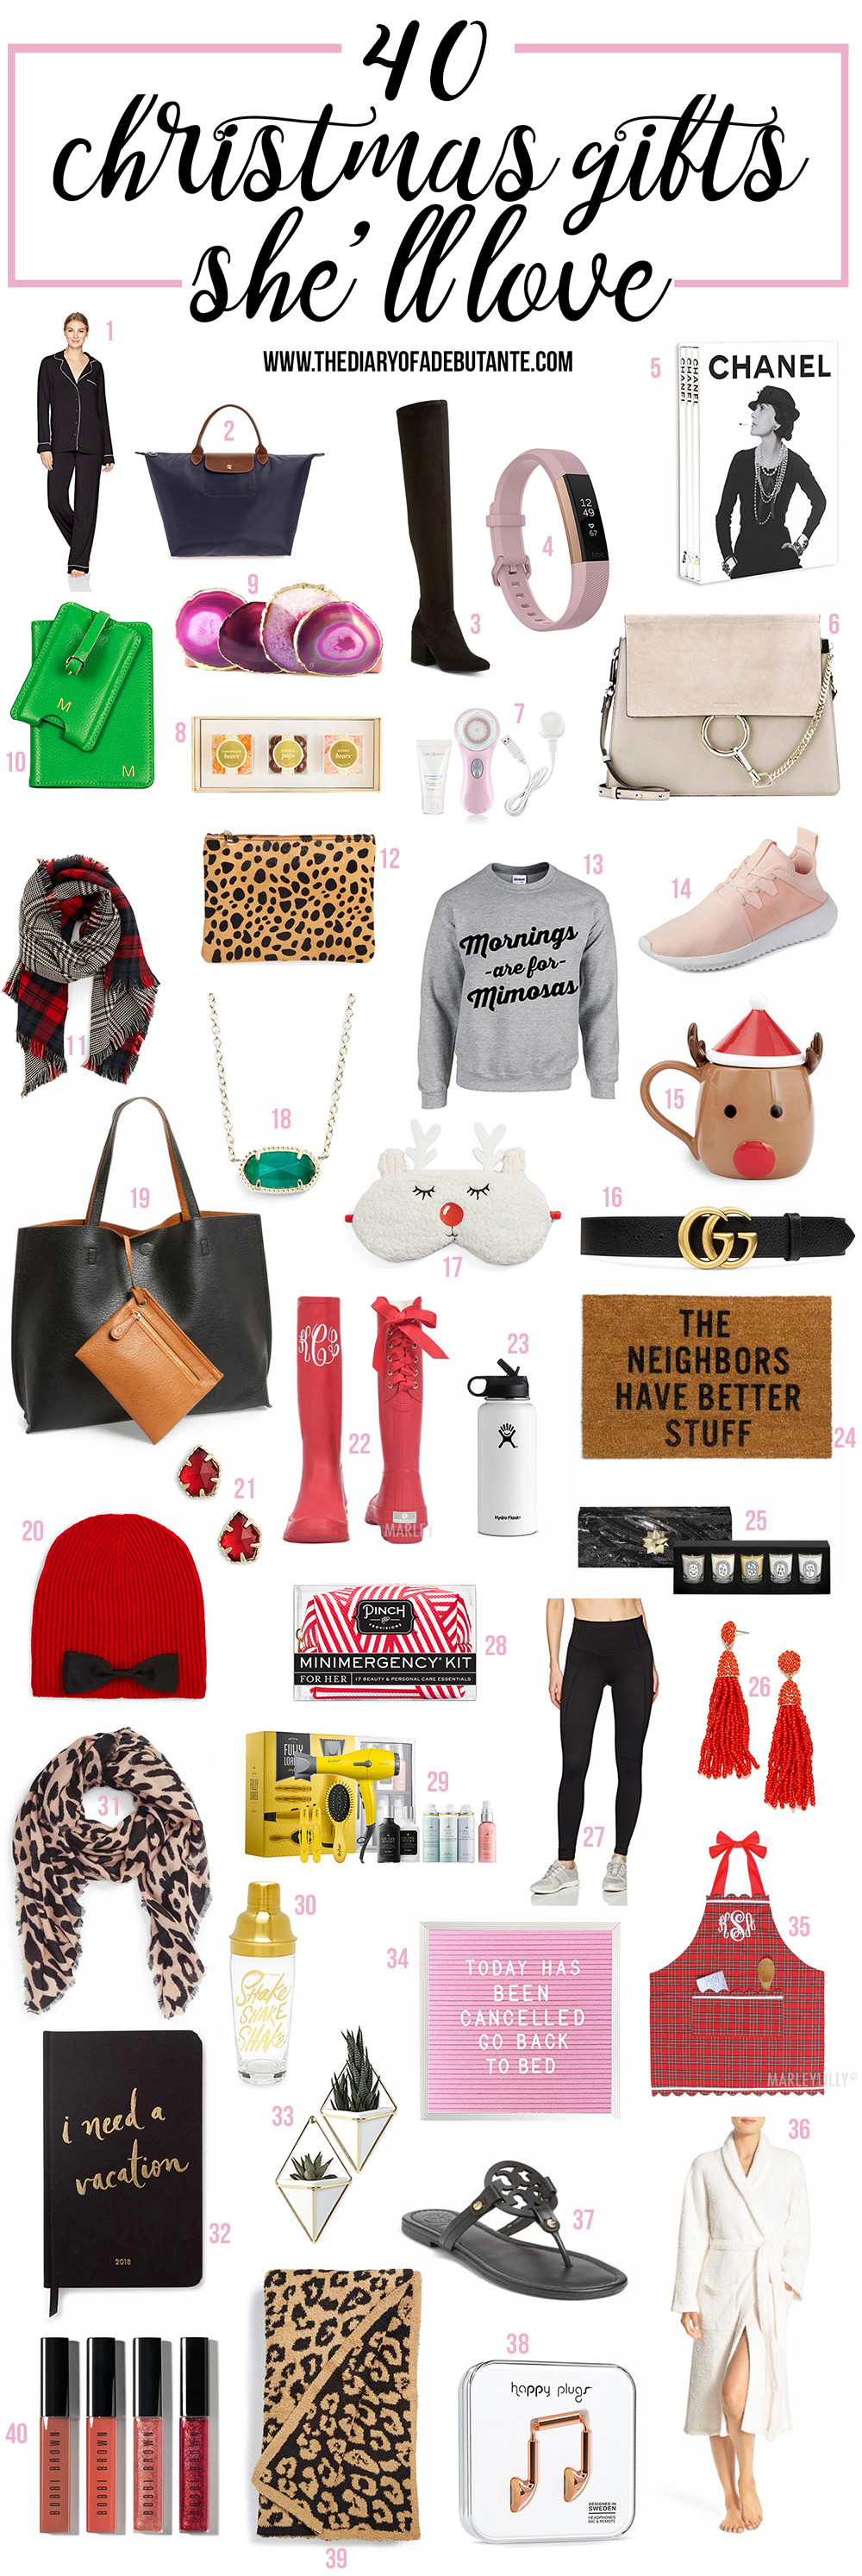 Christmas Gift Ideas For Your Gf
 Cool Gift Ideas for Girlfriend Mom or BFF this Holiday